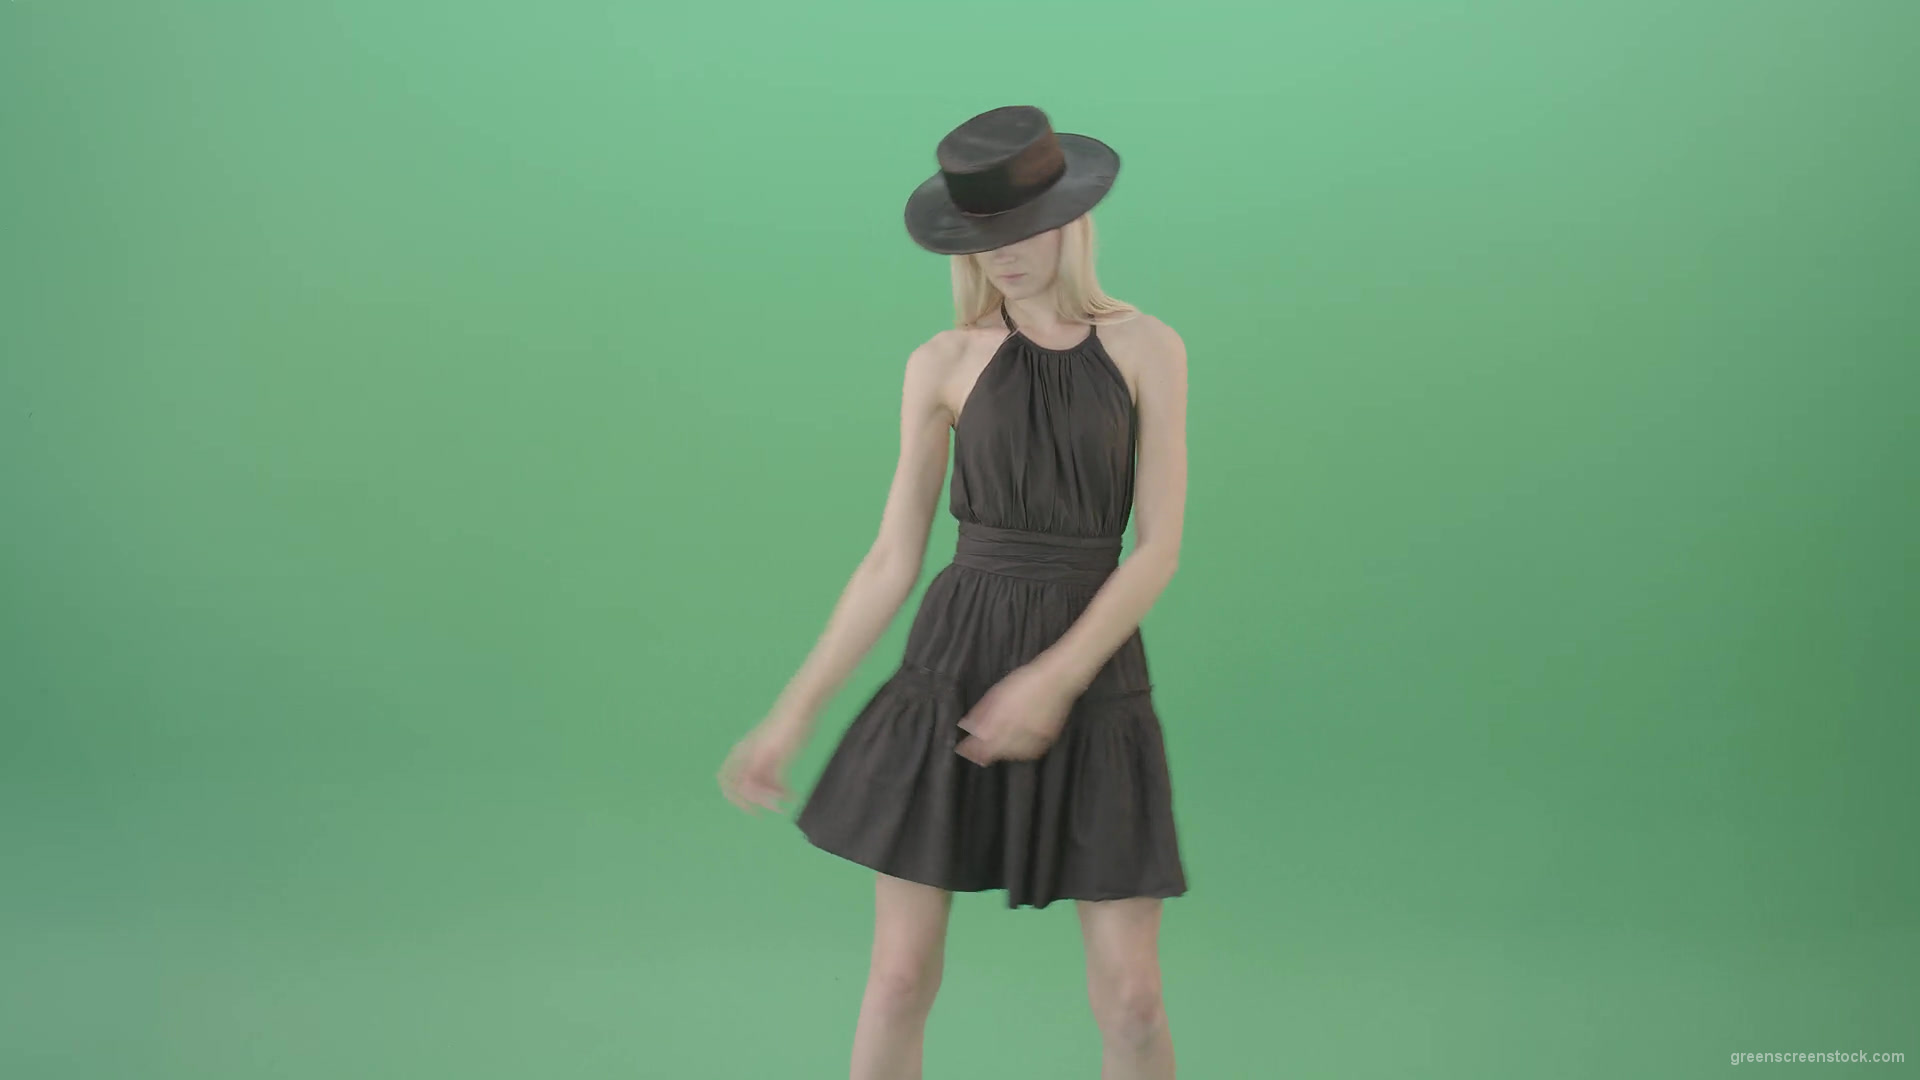 Elegant-girl-in-black-dress-and-hat-chilling-dance-isolated-on-green-screen-4K-Video-Footage-1920_002 Green Screen Stock